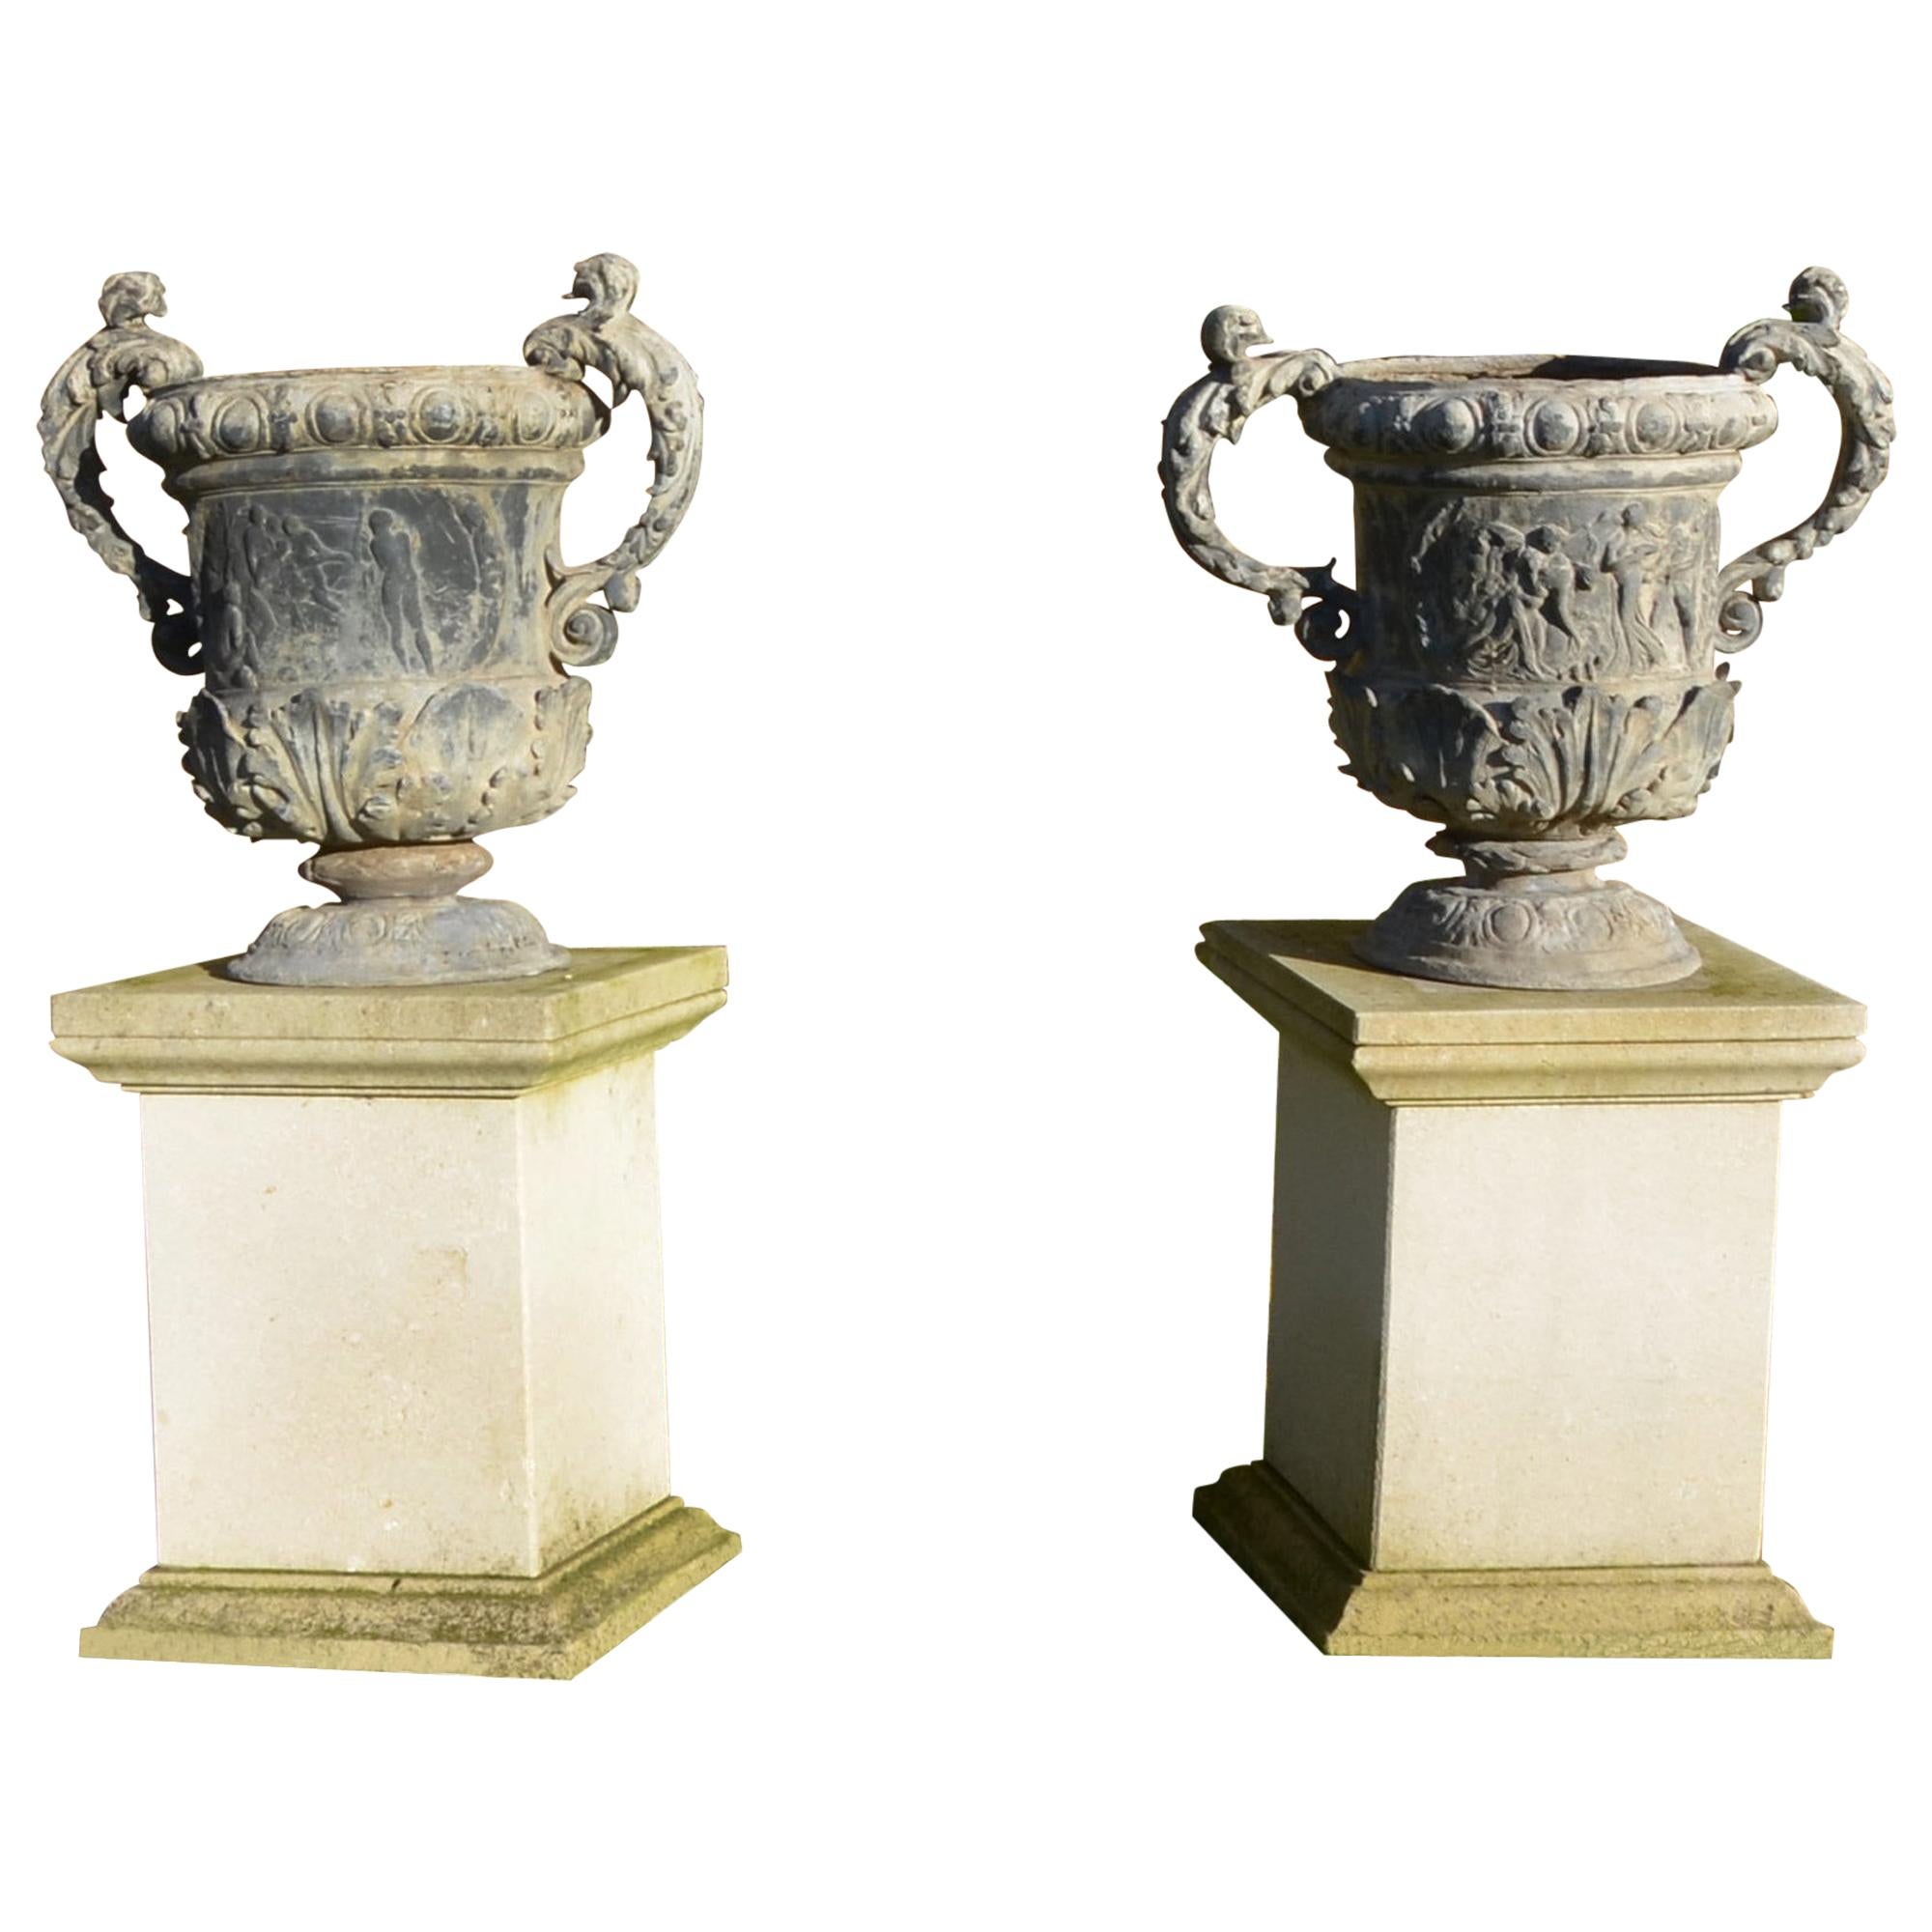 Large Pair of Ornate Lead Urns